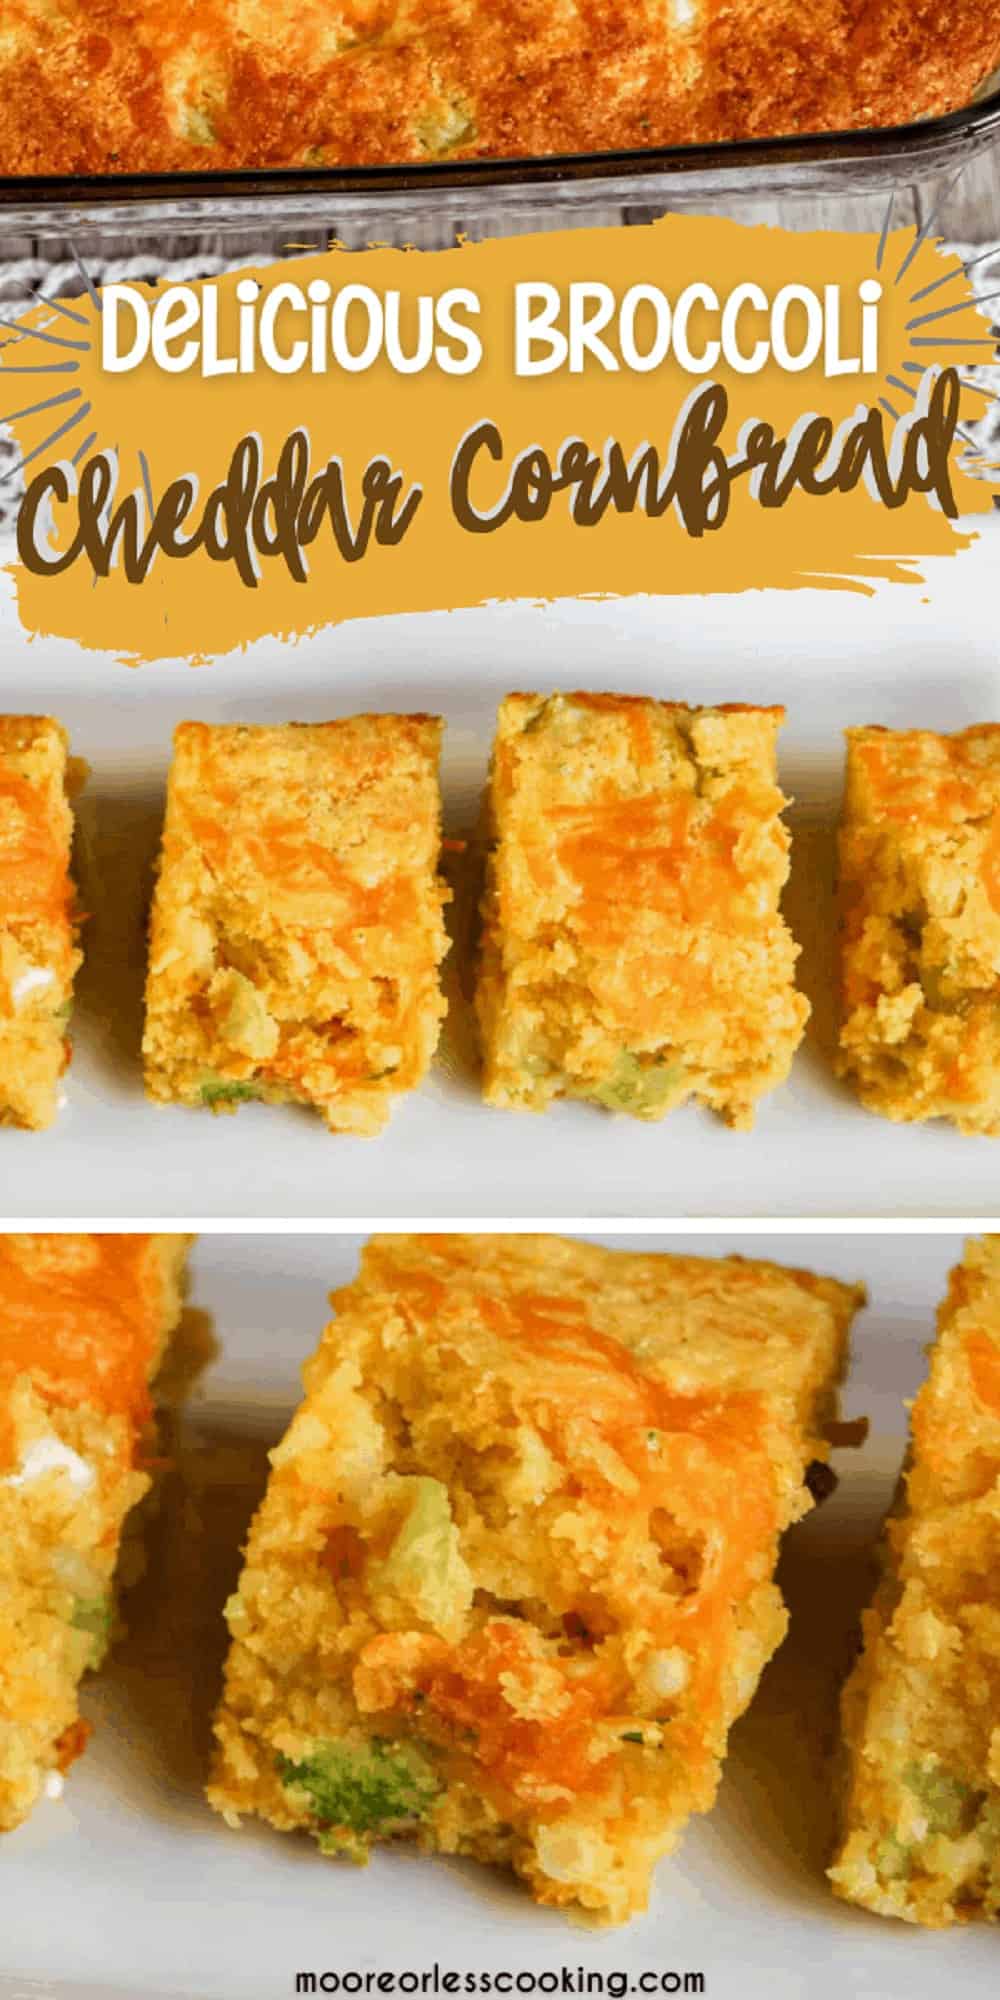 You’ll love this savory and delicious recipe that takes the classic combination of broccoli and cheddar cheese and combines it with cornbread. This tasty Broccoli Cheddar Cornbread recipe is sure to become a family favorite. via @Mooreorlesscook